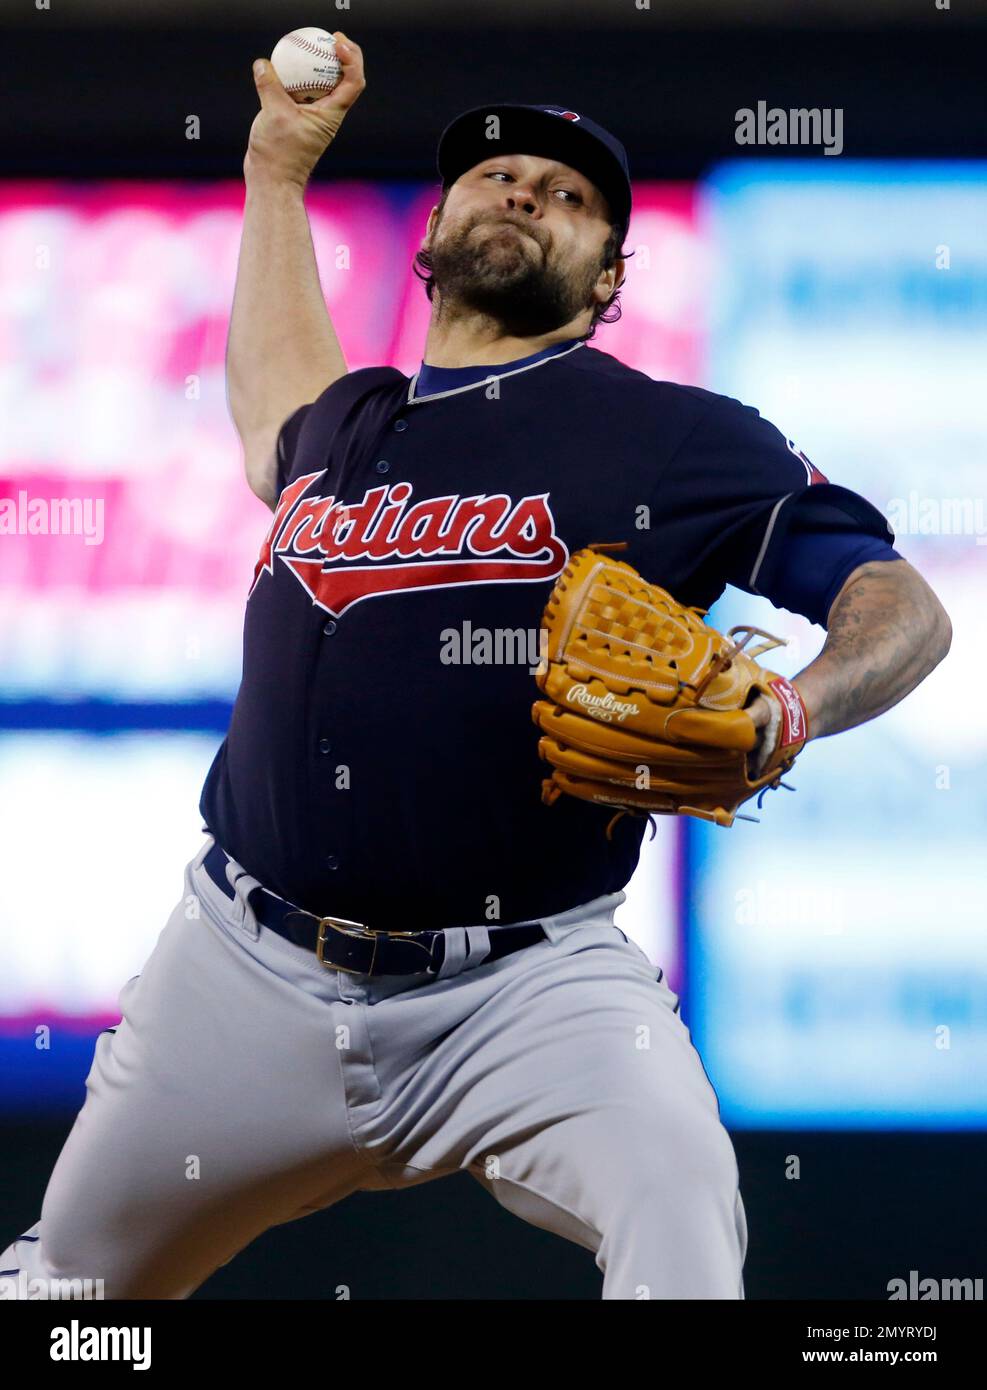 Cleveland Indians relief pitcher Joba Chamberlain throws against the  Minnesota Twins in a baseball game Monday, April 25, 2016, in Minneapolis.  (AP Photo/Jim Mone Stock Photo - Alamy